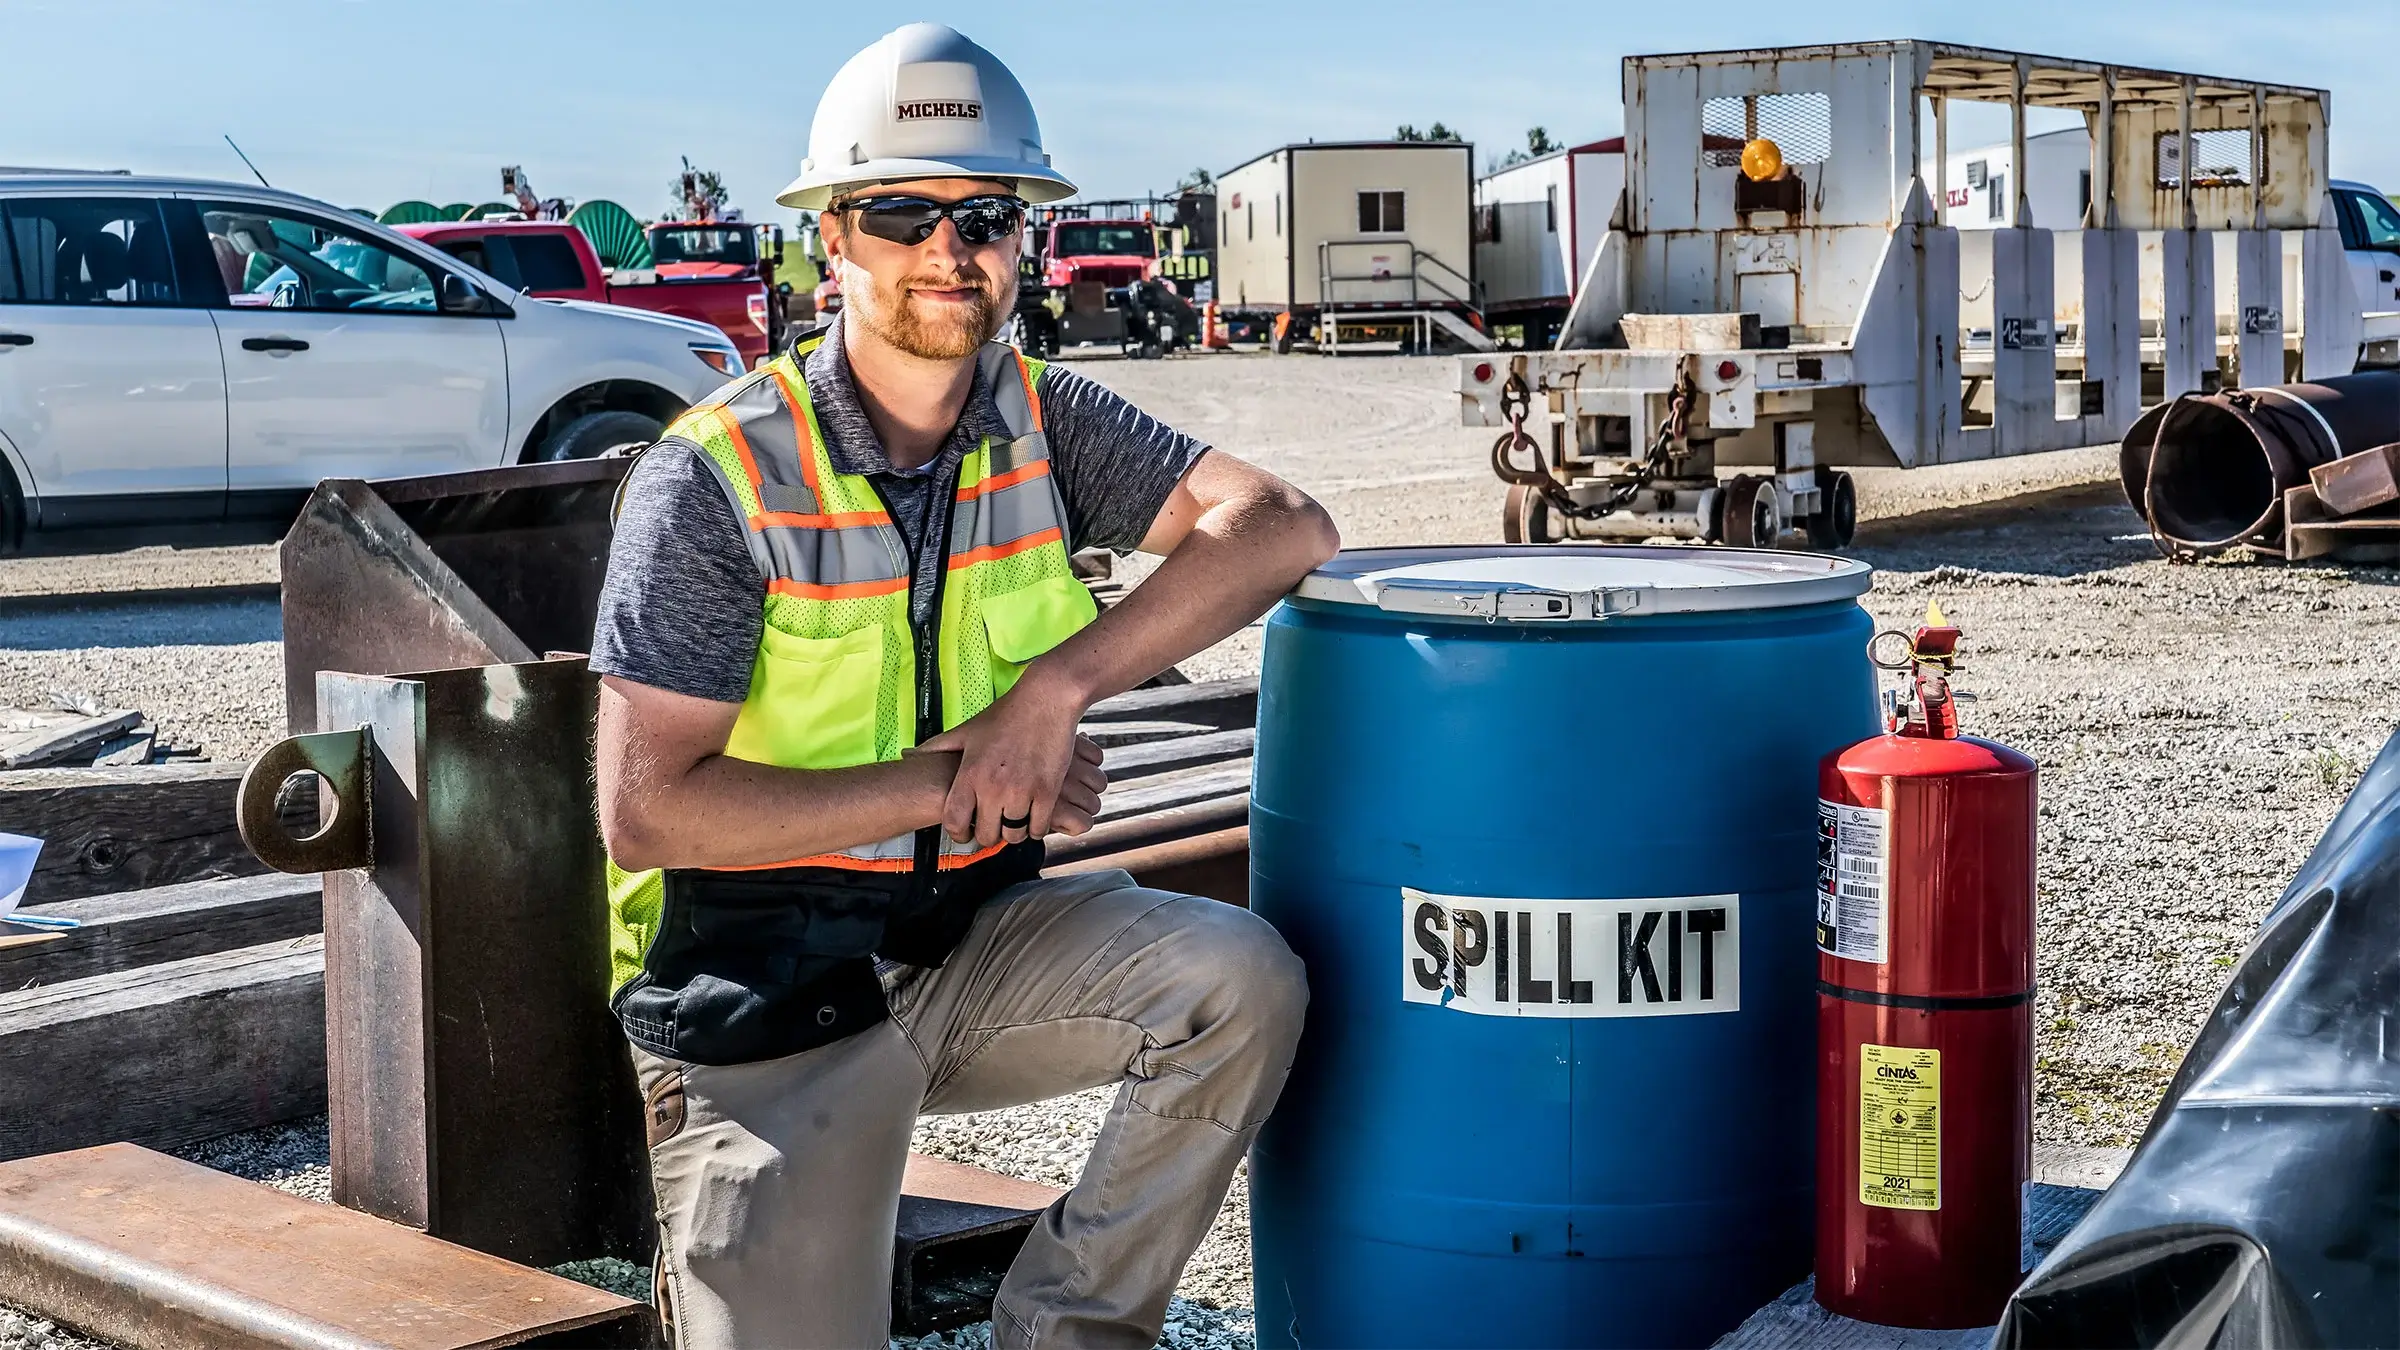 Specialist stands behind spill kit